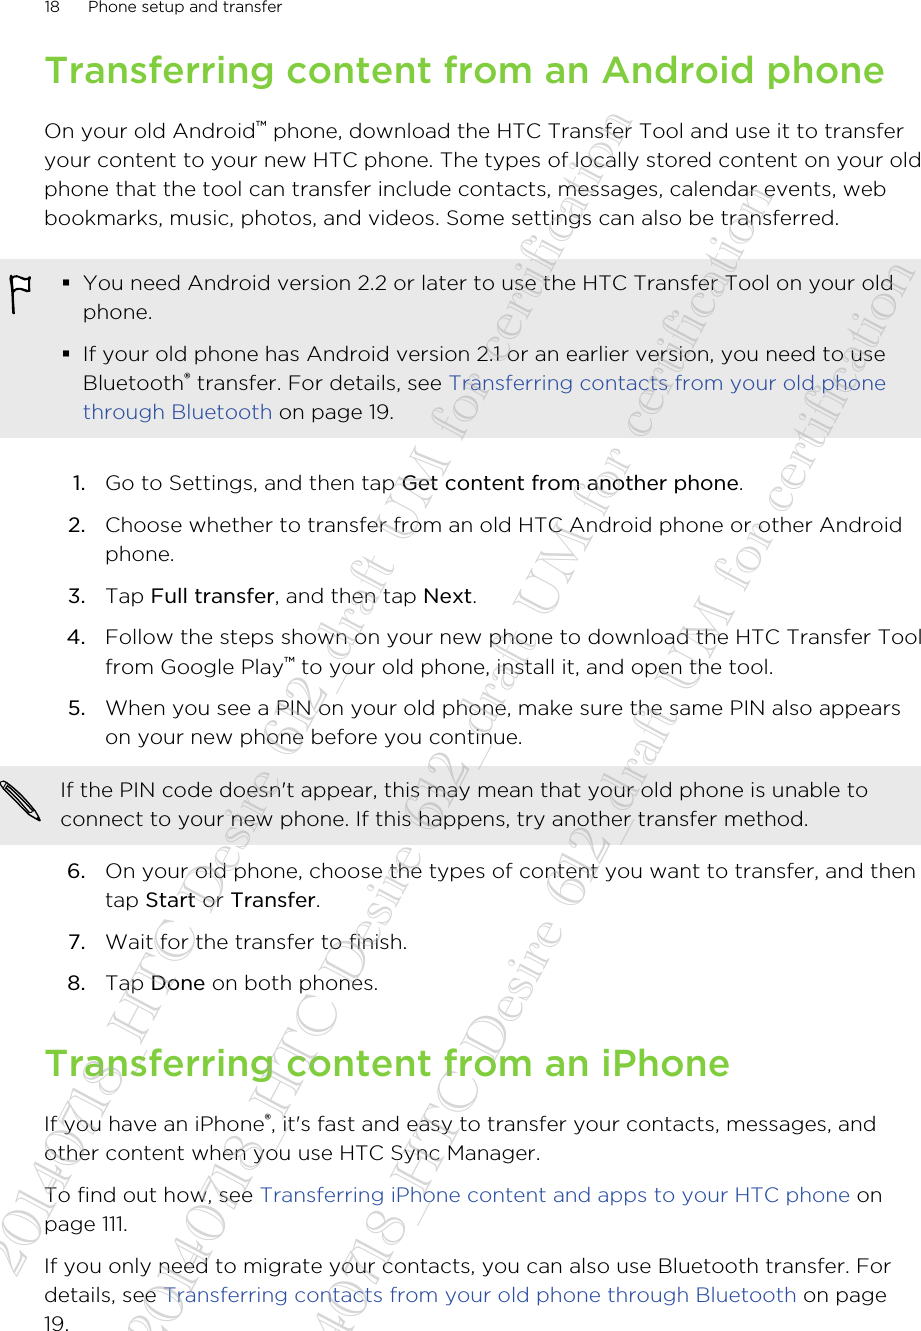 Transferring content from an Android phoneOn your old Android™ phone, download the HTC Transfer Tool and use it to transferyour content to your new HTC phone. The types of locally stored content on your oldphone that the tool can transfer include contacts, messages, calendar events, webbookmarks, music, photos, and videos. Some settings can also be transferred.§You need Android version 2.2 or later to use the HTC Transfer Tool on your oldphone.§If your old phone has Android version 2.1 or an earlier version, you need to useBluetooth® transfer. For details, see Transferring contacts from your old phonethrough Bluetooth on page 19.1. Go to Settings, and then tap Get content from another phone.2. Choose whether to transfer from an old HTC Android phone or other Androidphone.3. Tap Full transfer, and then tap Next.4. Follow the steps shown on your new phone to download the HTC Transfer Toolfrom Google Play™ to your old phone, install it, and open the tool.5. When you see a PIN on your old phone, make sure the same PIN also appearson your new phone before you continue. If the PIN code doesn&apos;t appear, this may mean that your old phone is unable toconnect to your new phone. If this happens, try another transfer method.6. On your old phone, choose the types of content you want to transfer, and thentap Start or Transfer.7. Wait for the transfer to finish.8. Tap Done on both phones.Transferring content from an iPhoneIf you have an iPhone®, it&apos;s fast and easy to transfer your contacts, messages, andother content when you use HTC Sync Manager.To find out how, see Transferring iPhone content and apps to your HTC phone onpage 111.If you only need to migrate your contacts, you can also use Bluetooth transfer. Fordetails, see Transferring contacts from your old phone through Bluetooth on page19.18 Phone setup and transfer20140718_HTC Desire 612_draft UM for certification  20140718_HTC Desire 612_draft UM for certification  20140718_HTC Desire 612_draft UM for certification